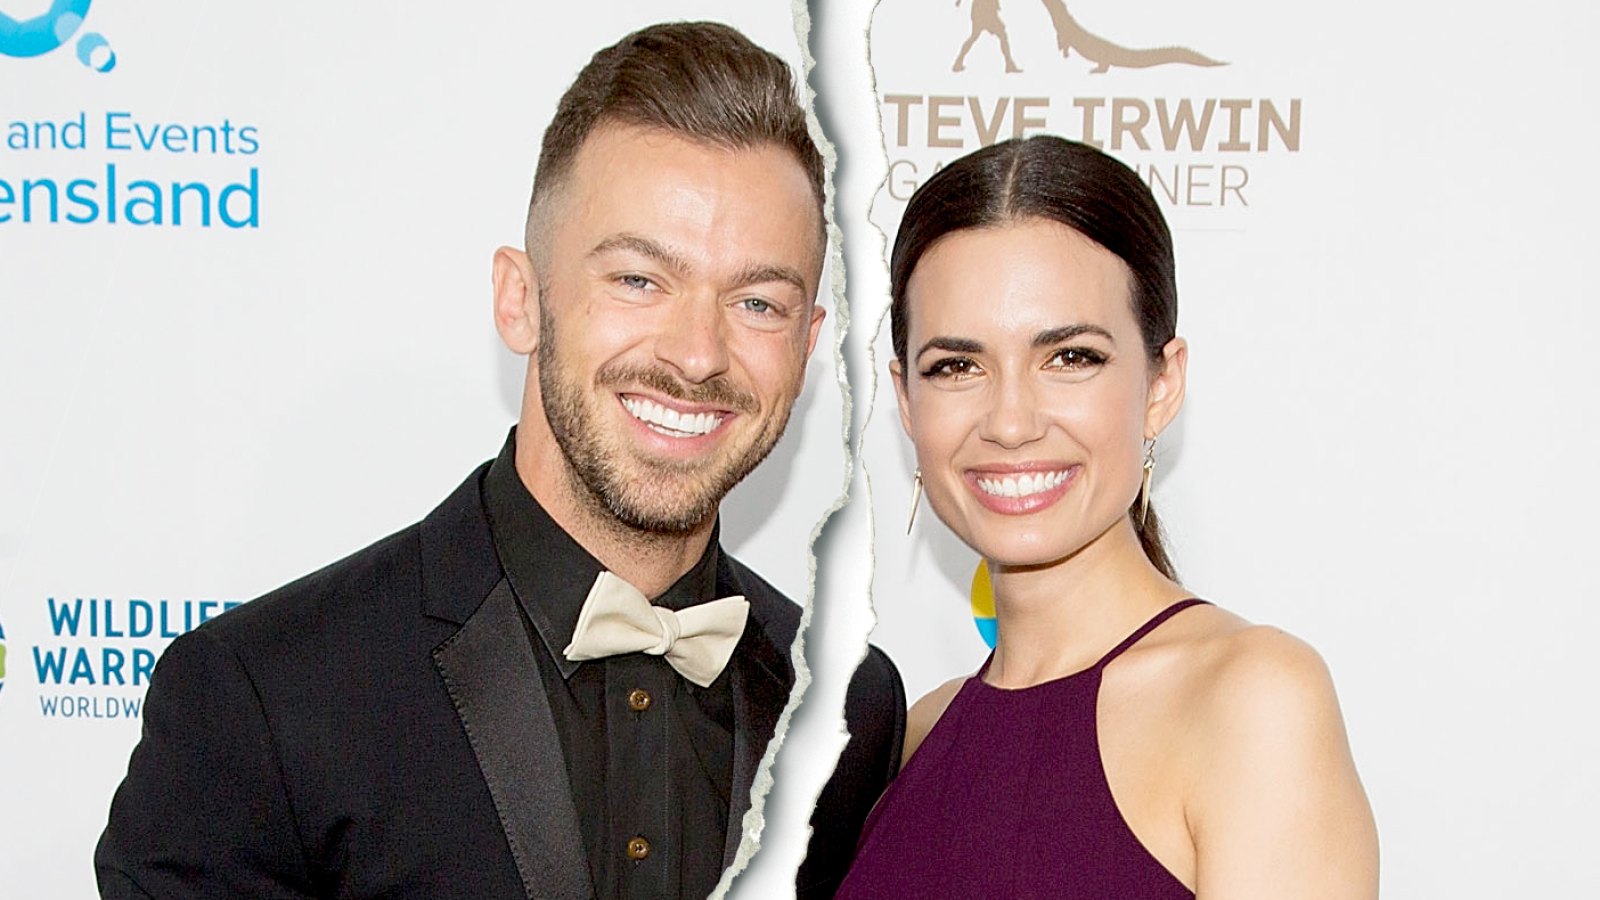 Artem Chigvintsev and Torrey DeVitto arrive for the Steve Irwin Gala Dinner at JW Marriott Los Angeles at L.A. LIVE on May 21, 2016 in Los Angeles, California.